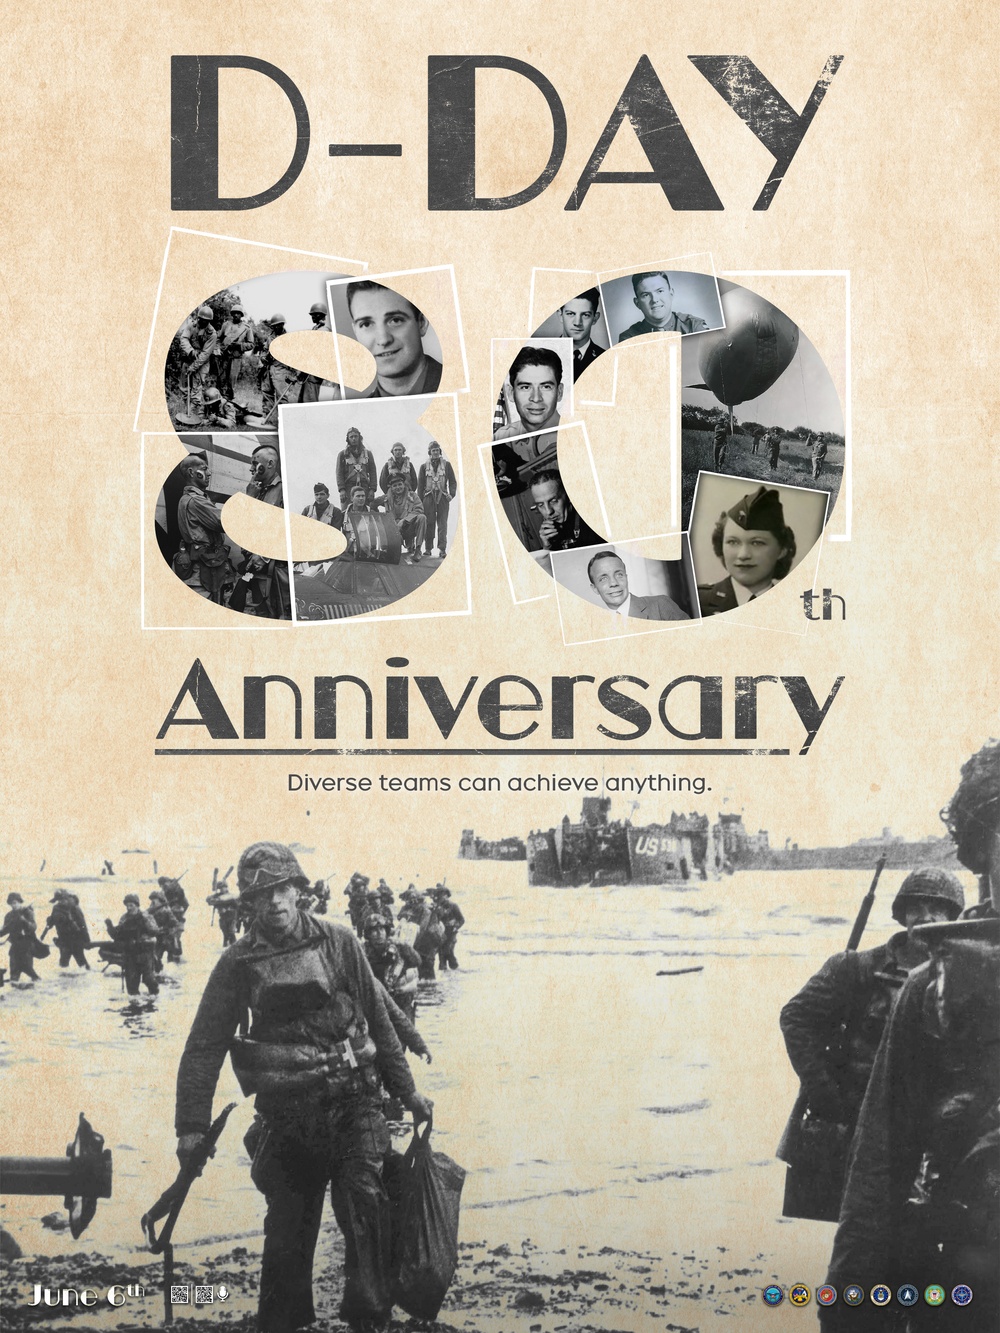 D-Day 80th Anniversary Poster - Diverse teams can achieve anything